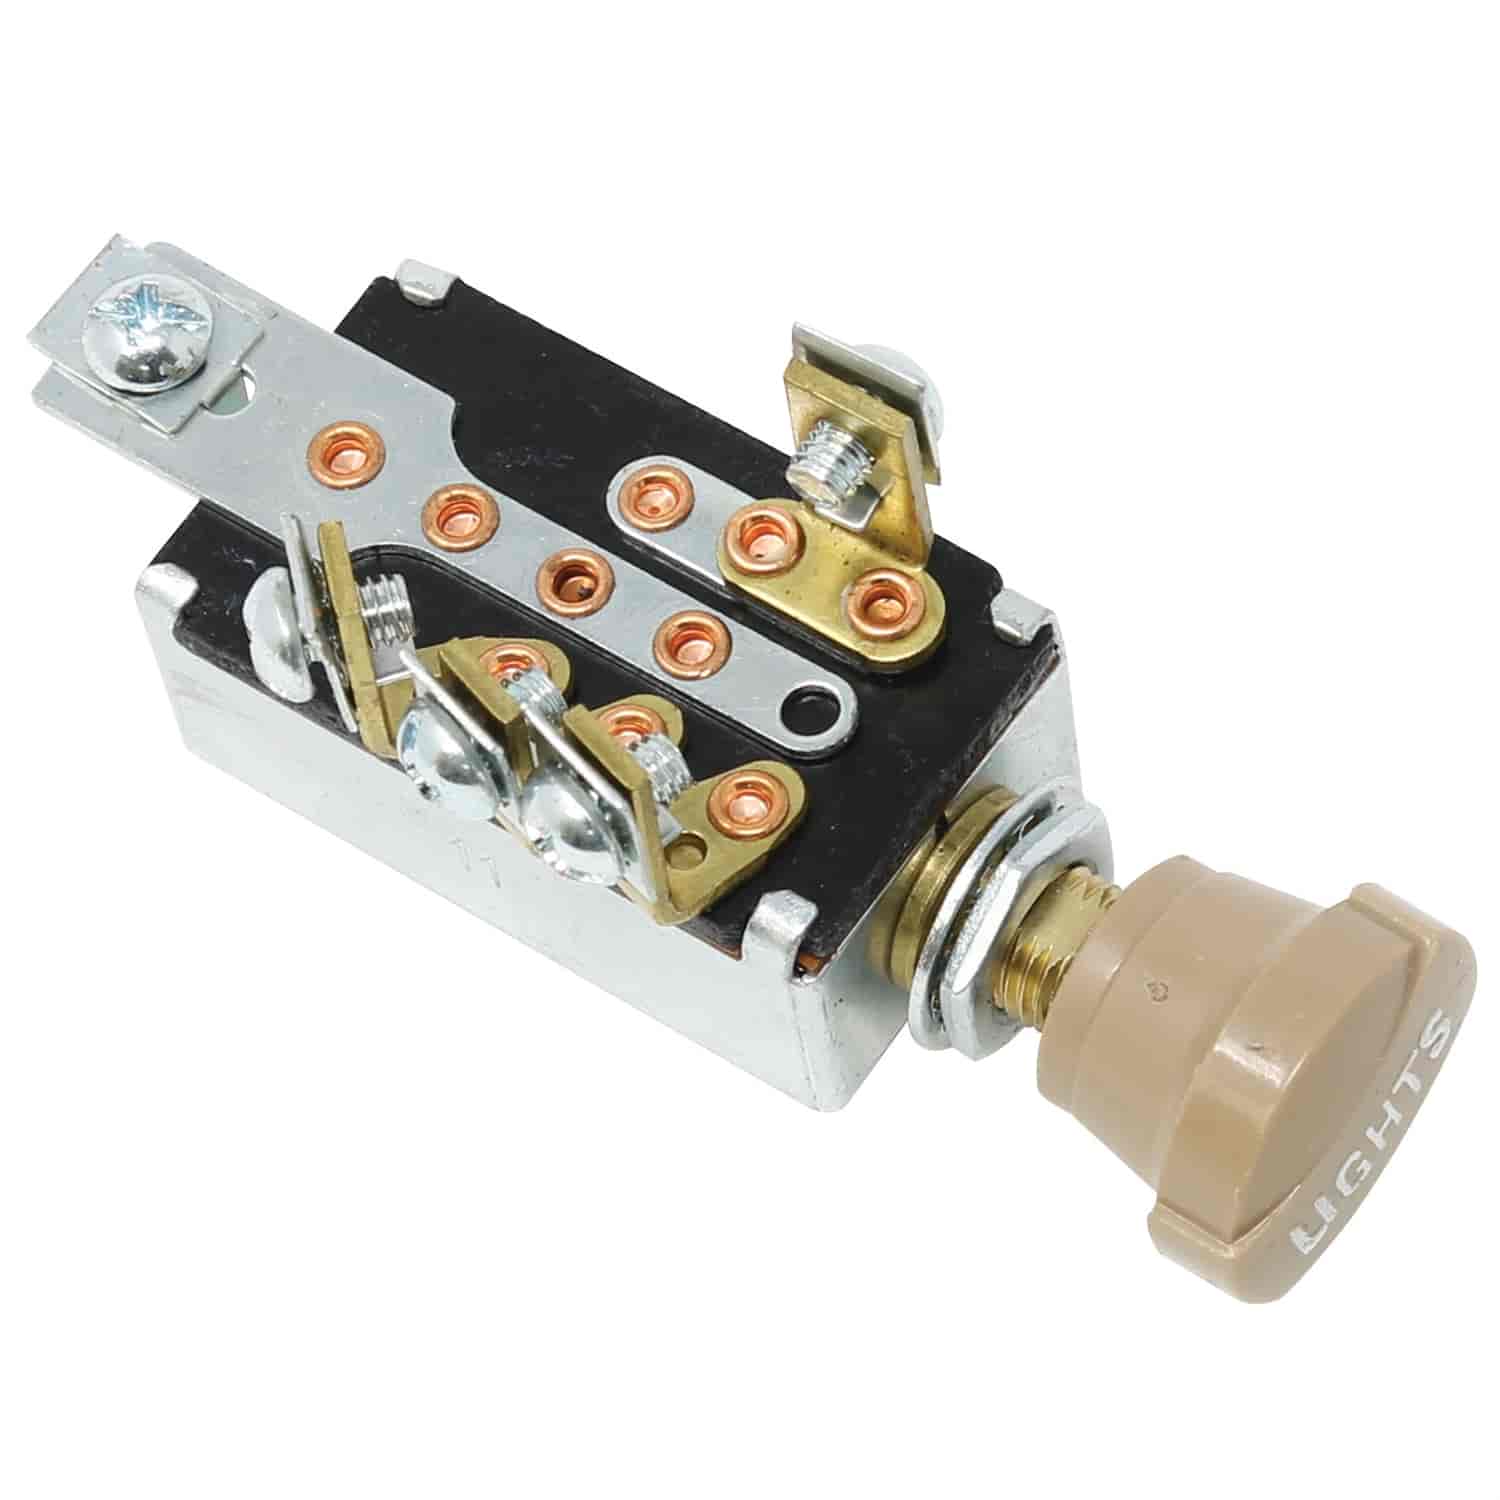 4-Position Push-Pull Headlight Switch Assembly